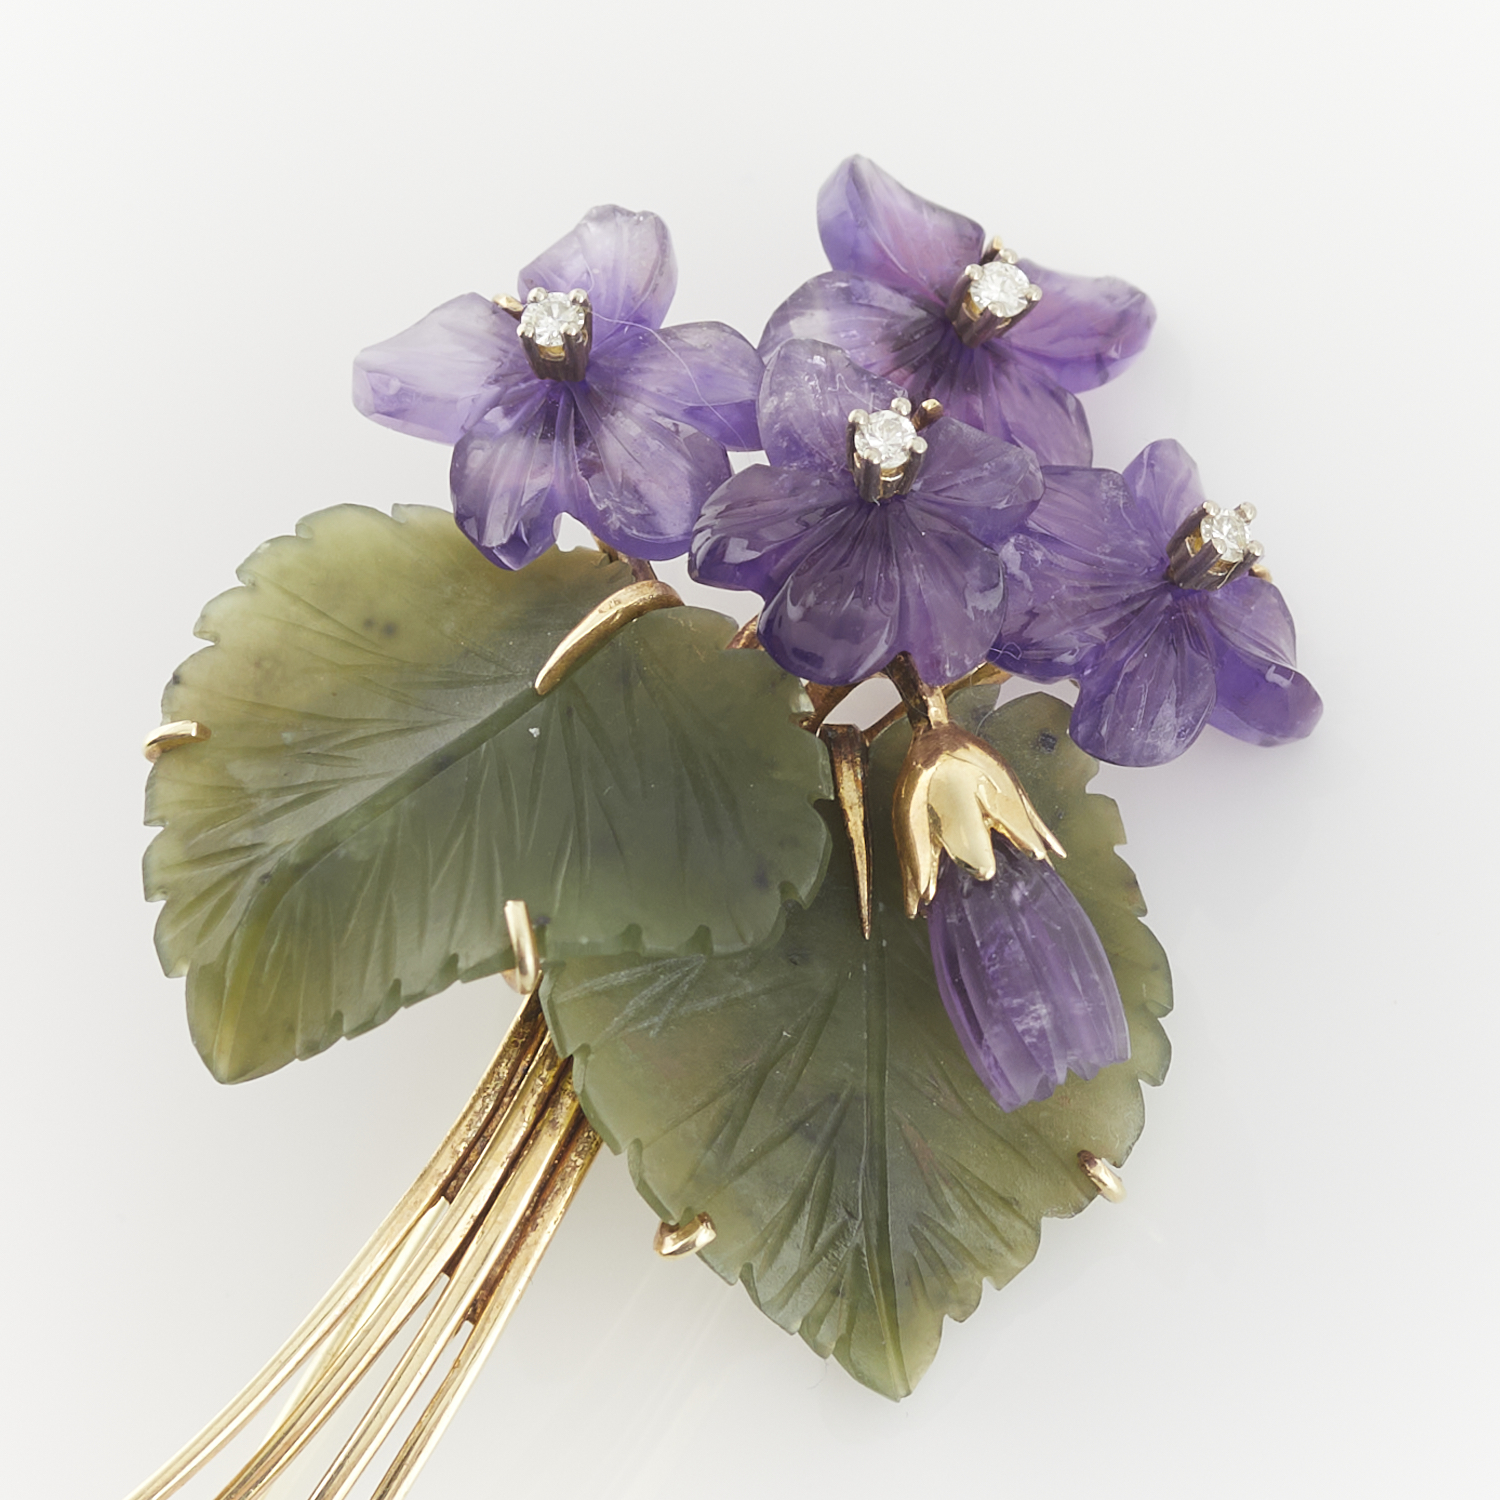 14k Yellow Gold Carved Violets Brooch - Image 5 of 6